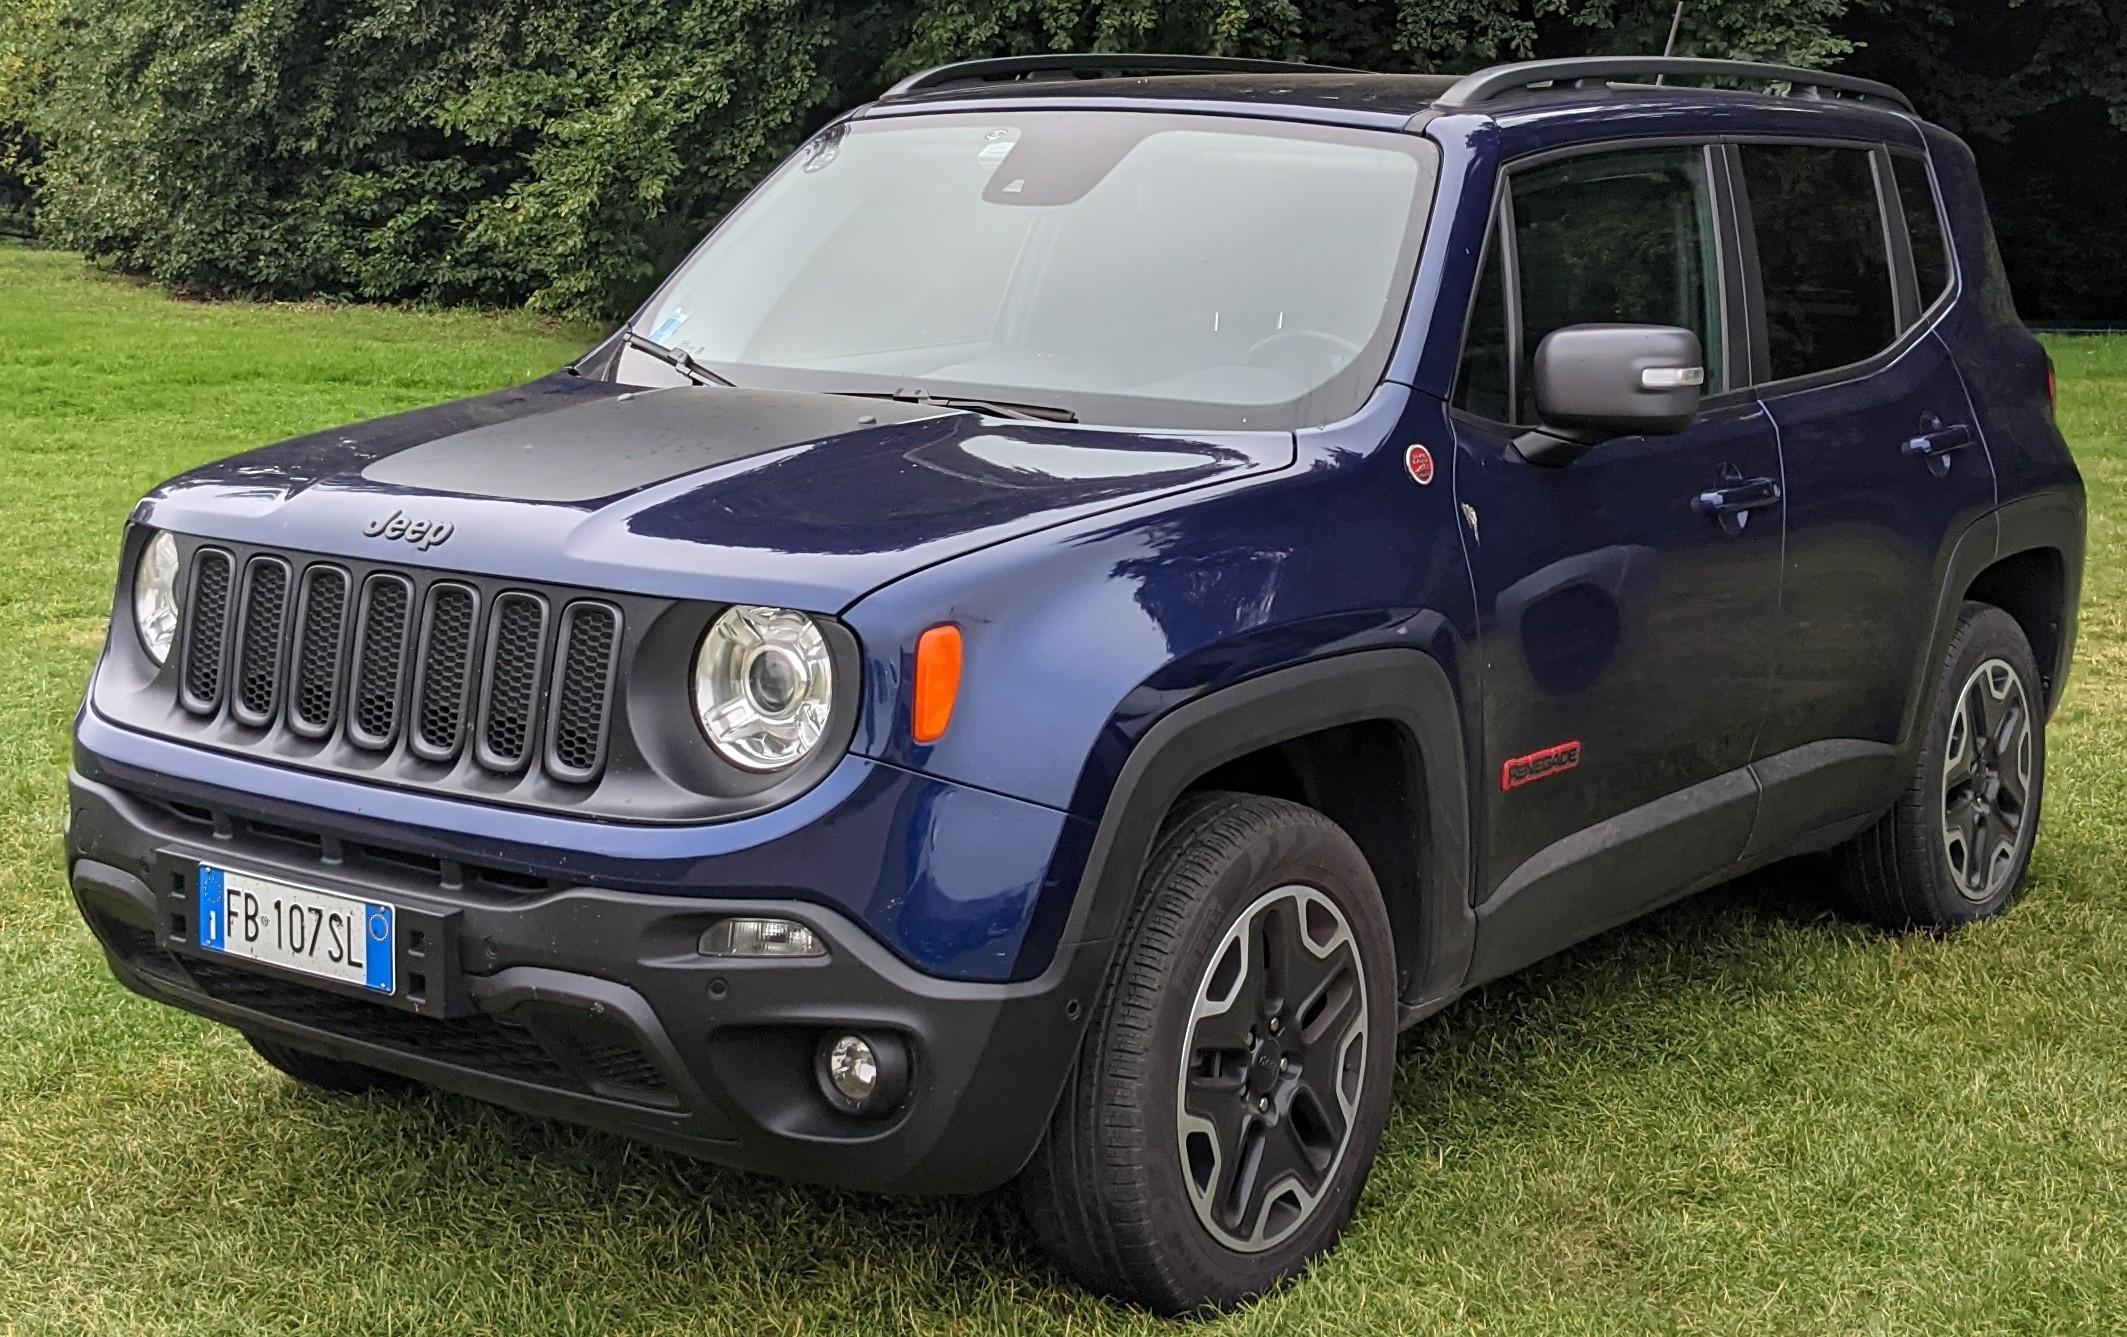 - Tips for optimizing fuel efficiency in a Jeep Renegade